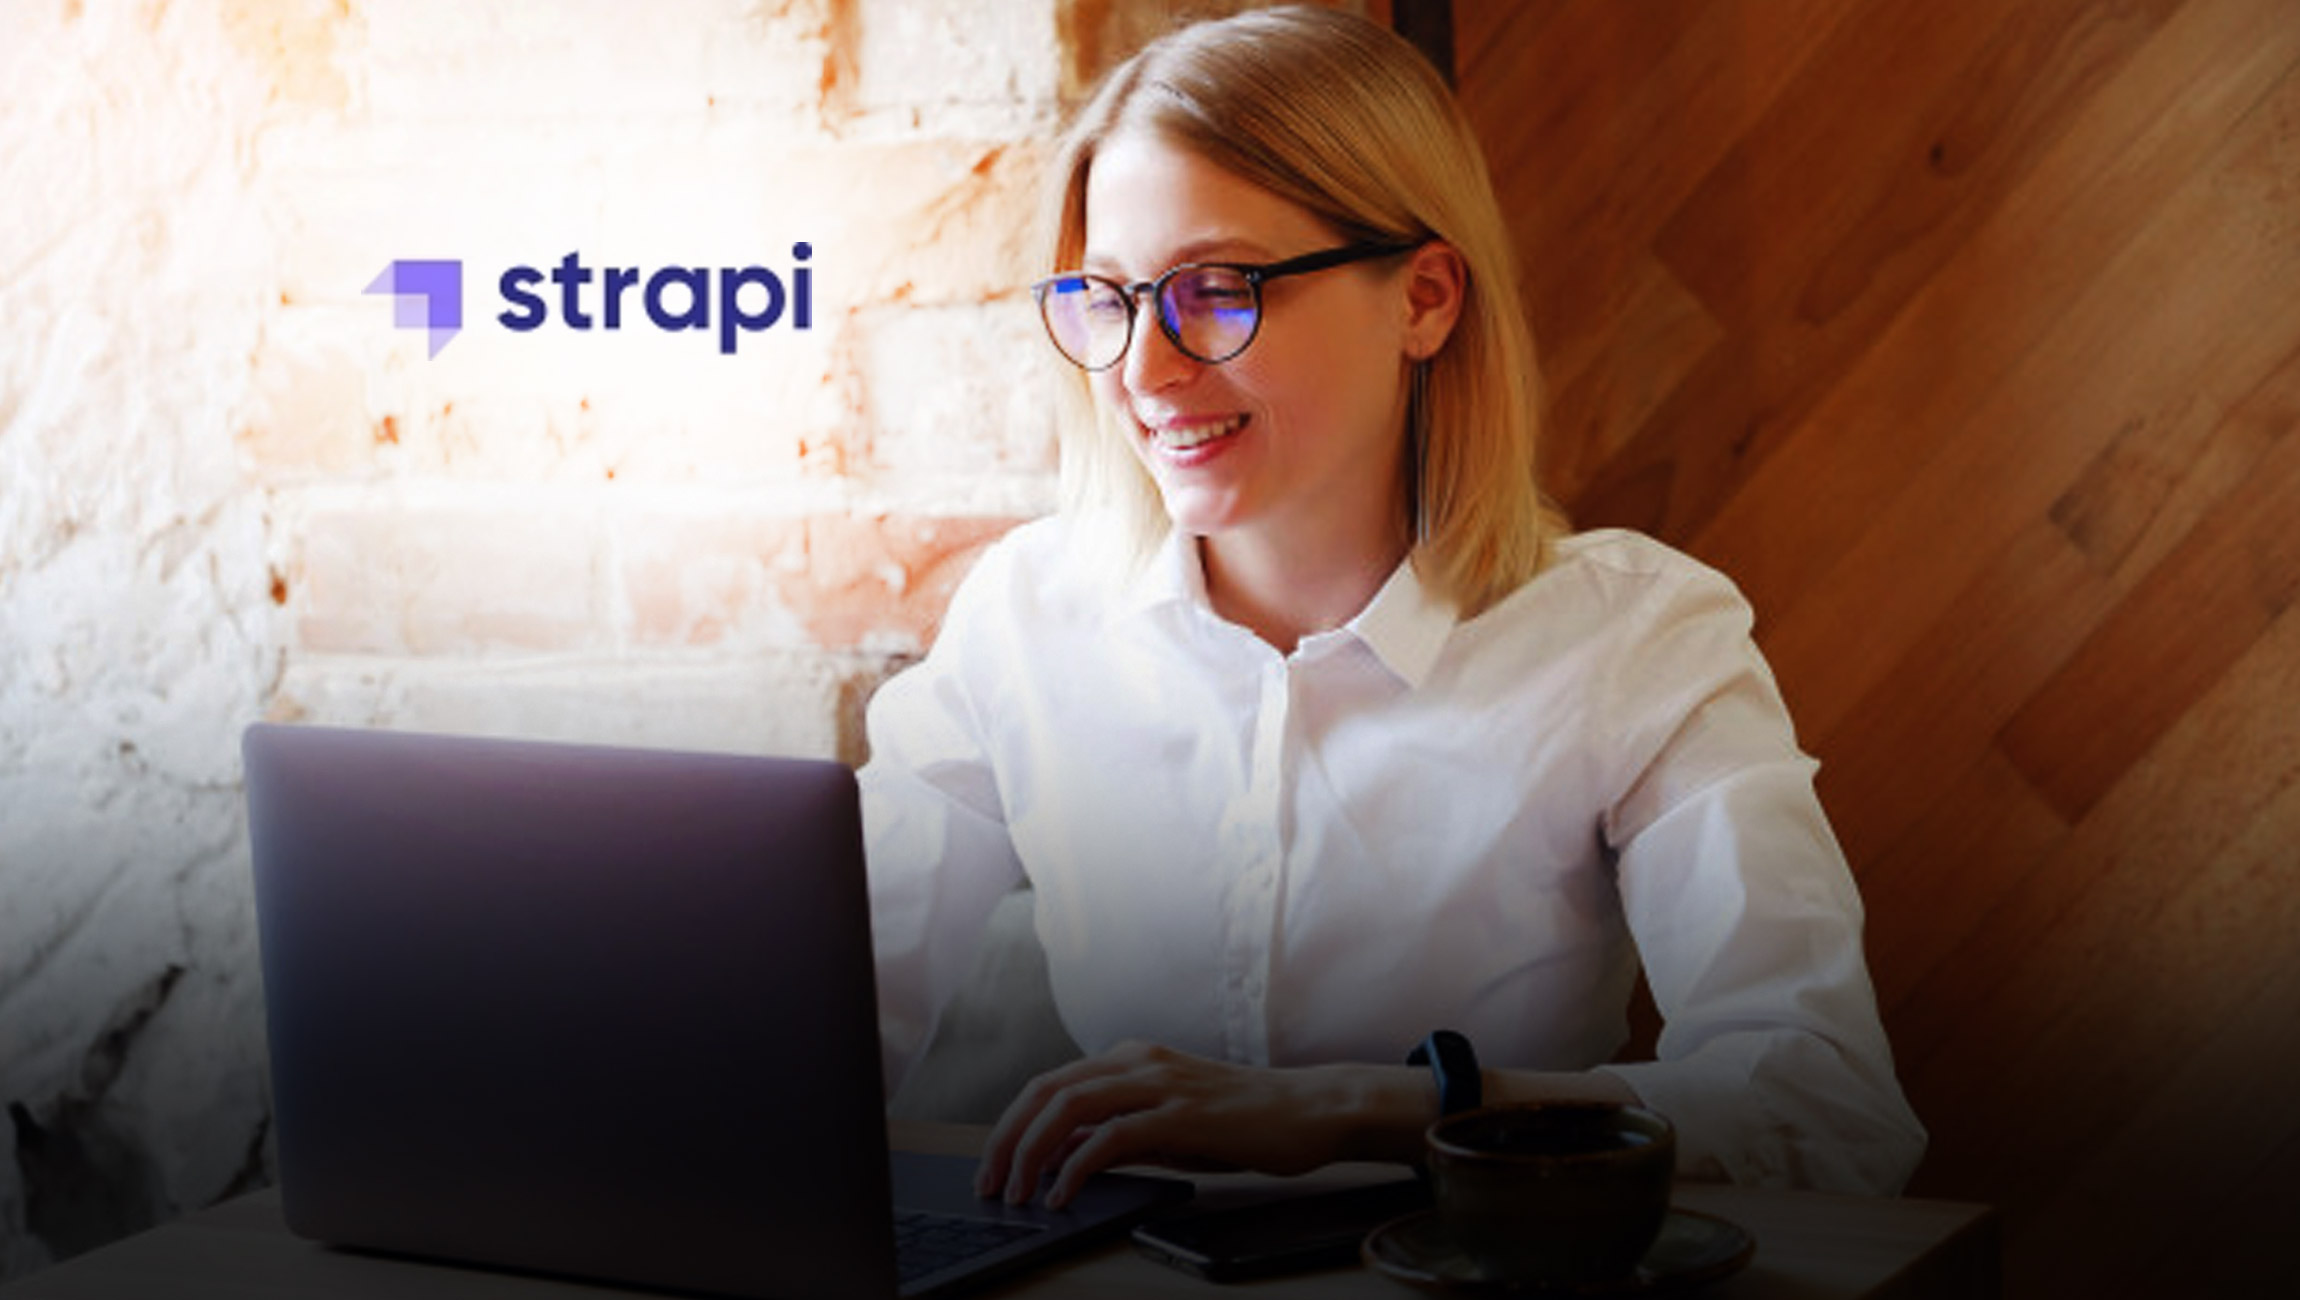 Headless Content Management System Strapi Upgrades Community and Enterprise Versions, Adds Lower Price Option